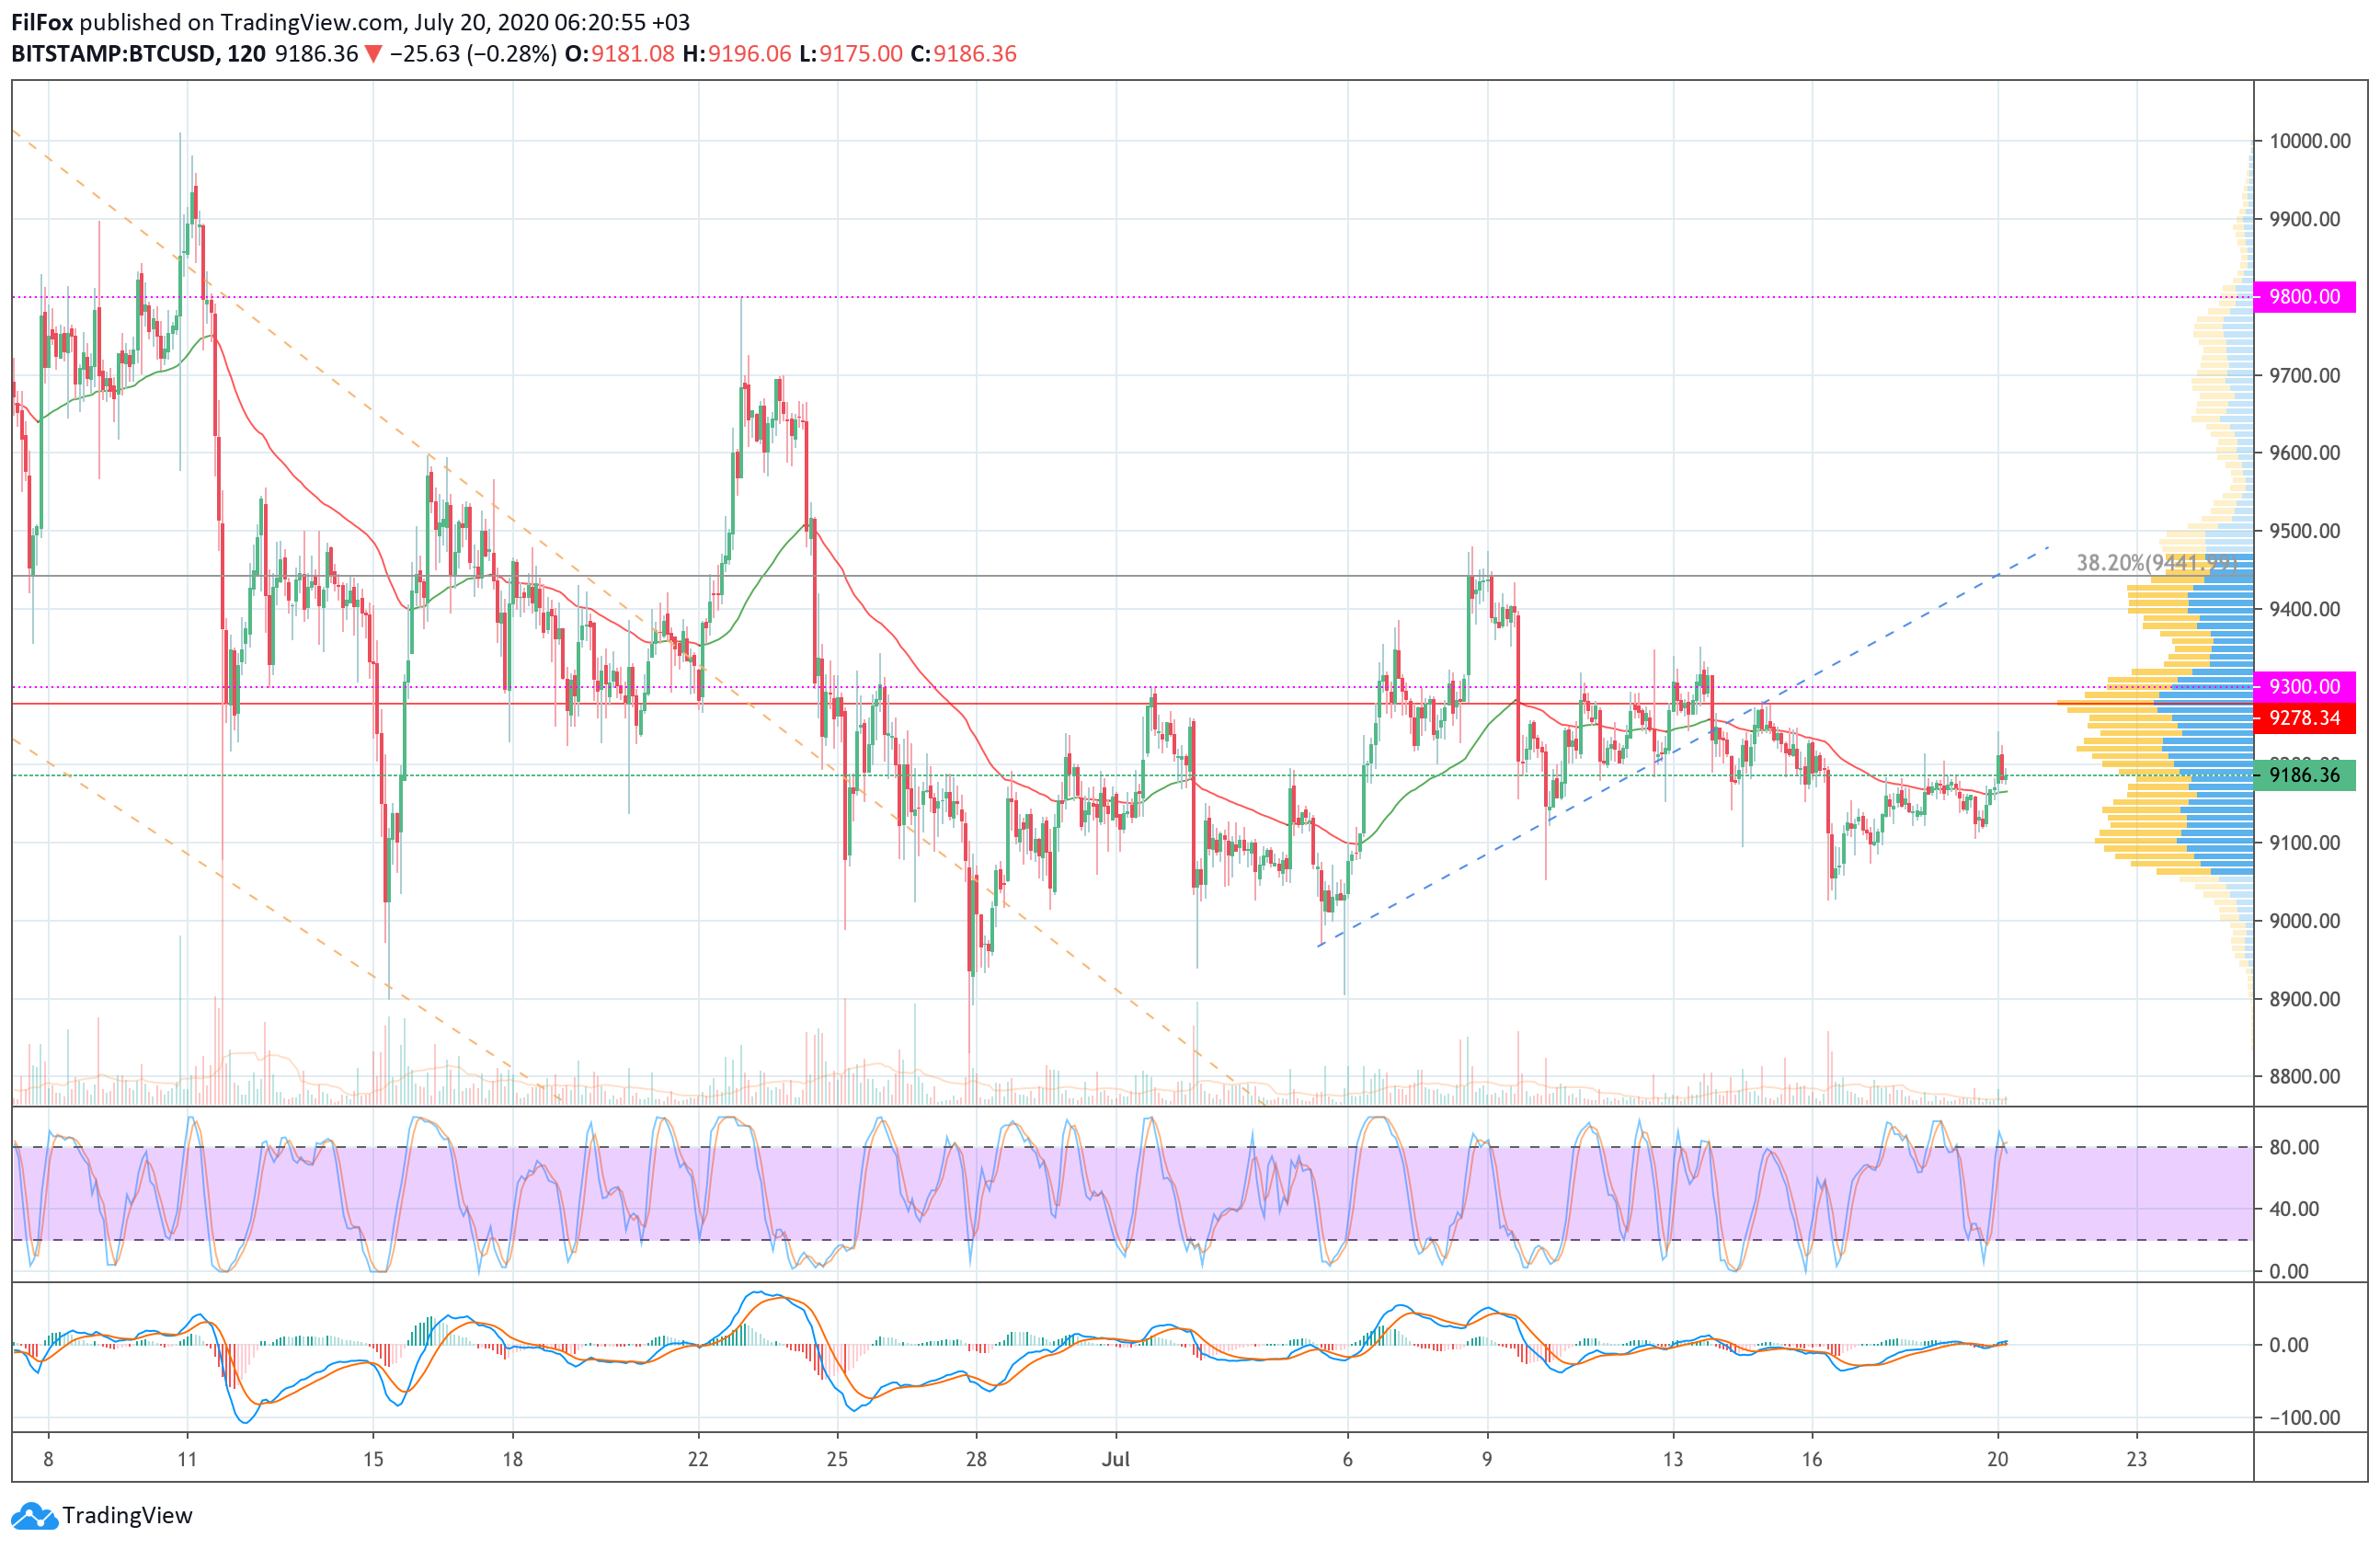 Analysis of prices for Bitcoin, Ethereum, XRP for 07/20/2020